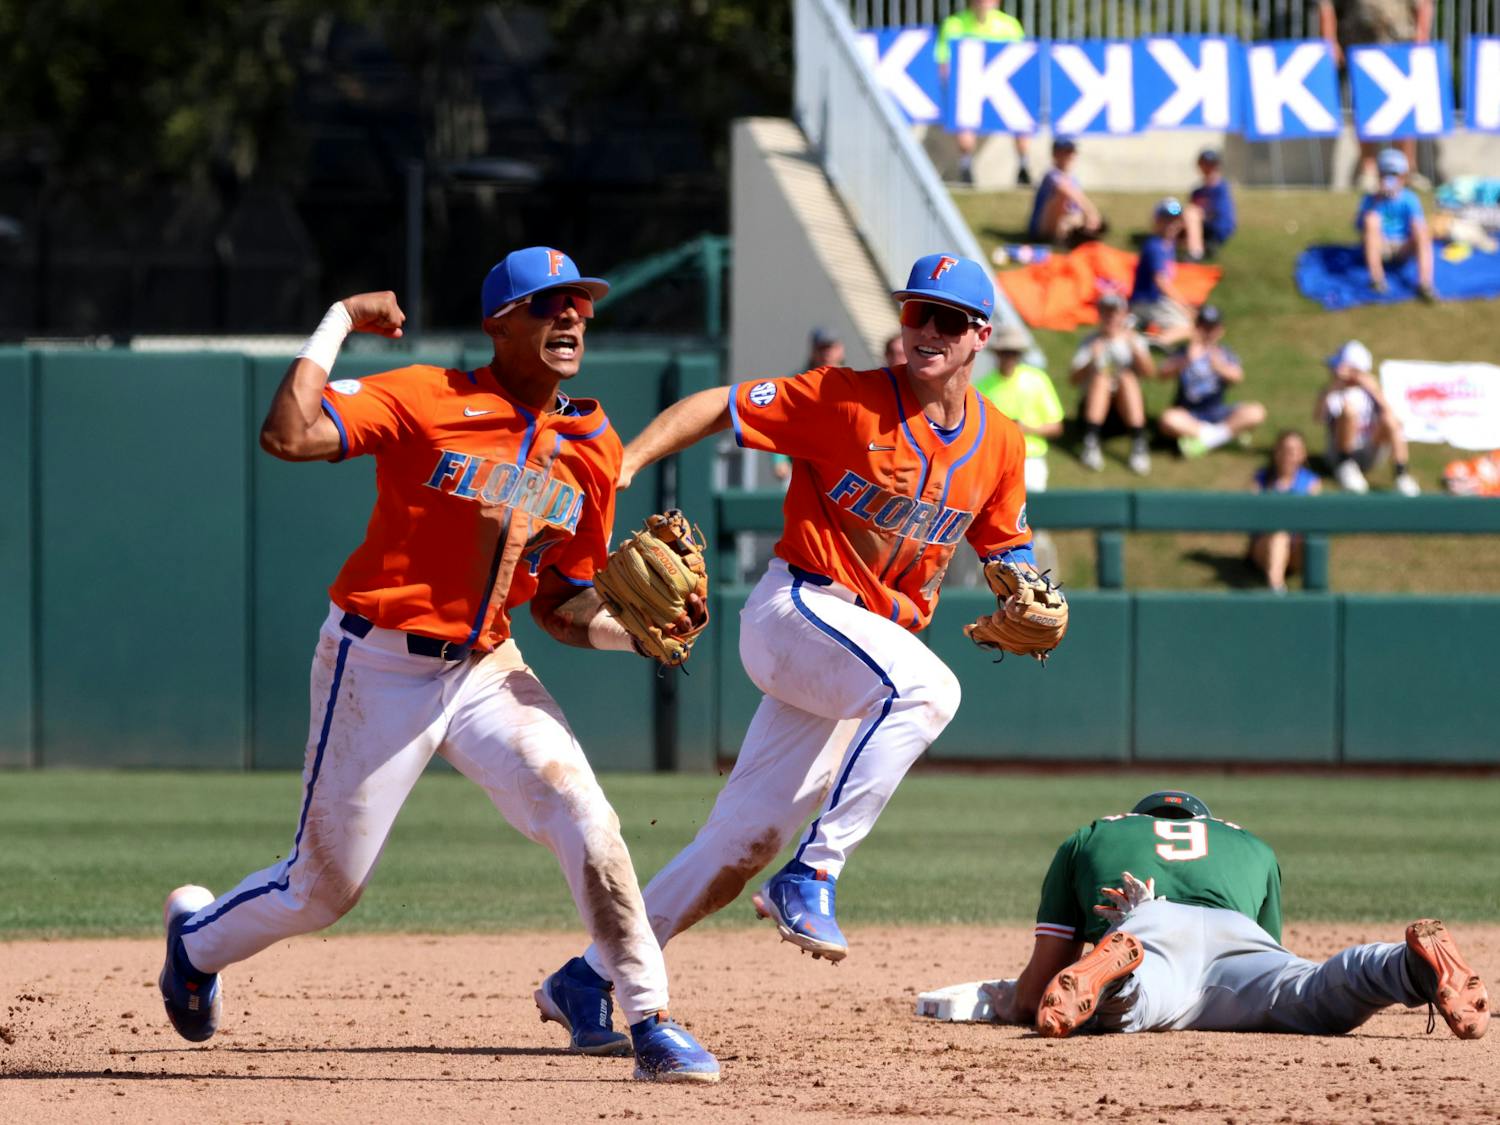 UF junior shortstop Josh Rivera celebrates turning a double play to end the top of the eighth inning of No. 6 Florida’s 14-4 mercy-rule win against the No. 22 Miami Hurricanes at Condron Ballpark Sunday, March 5, 2023.